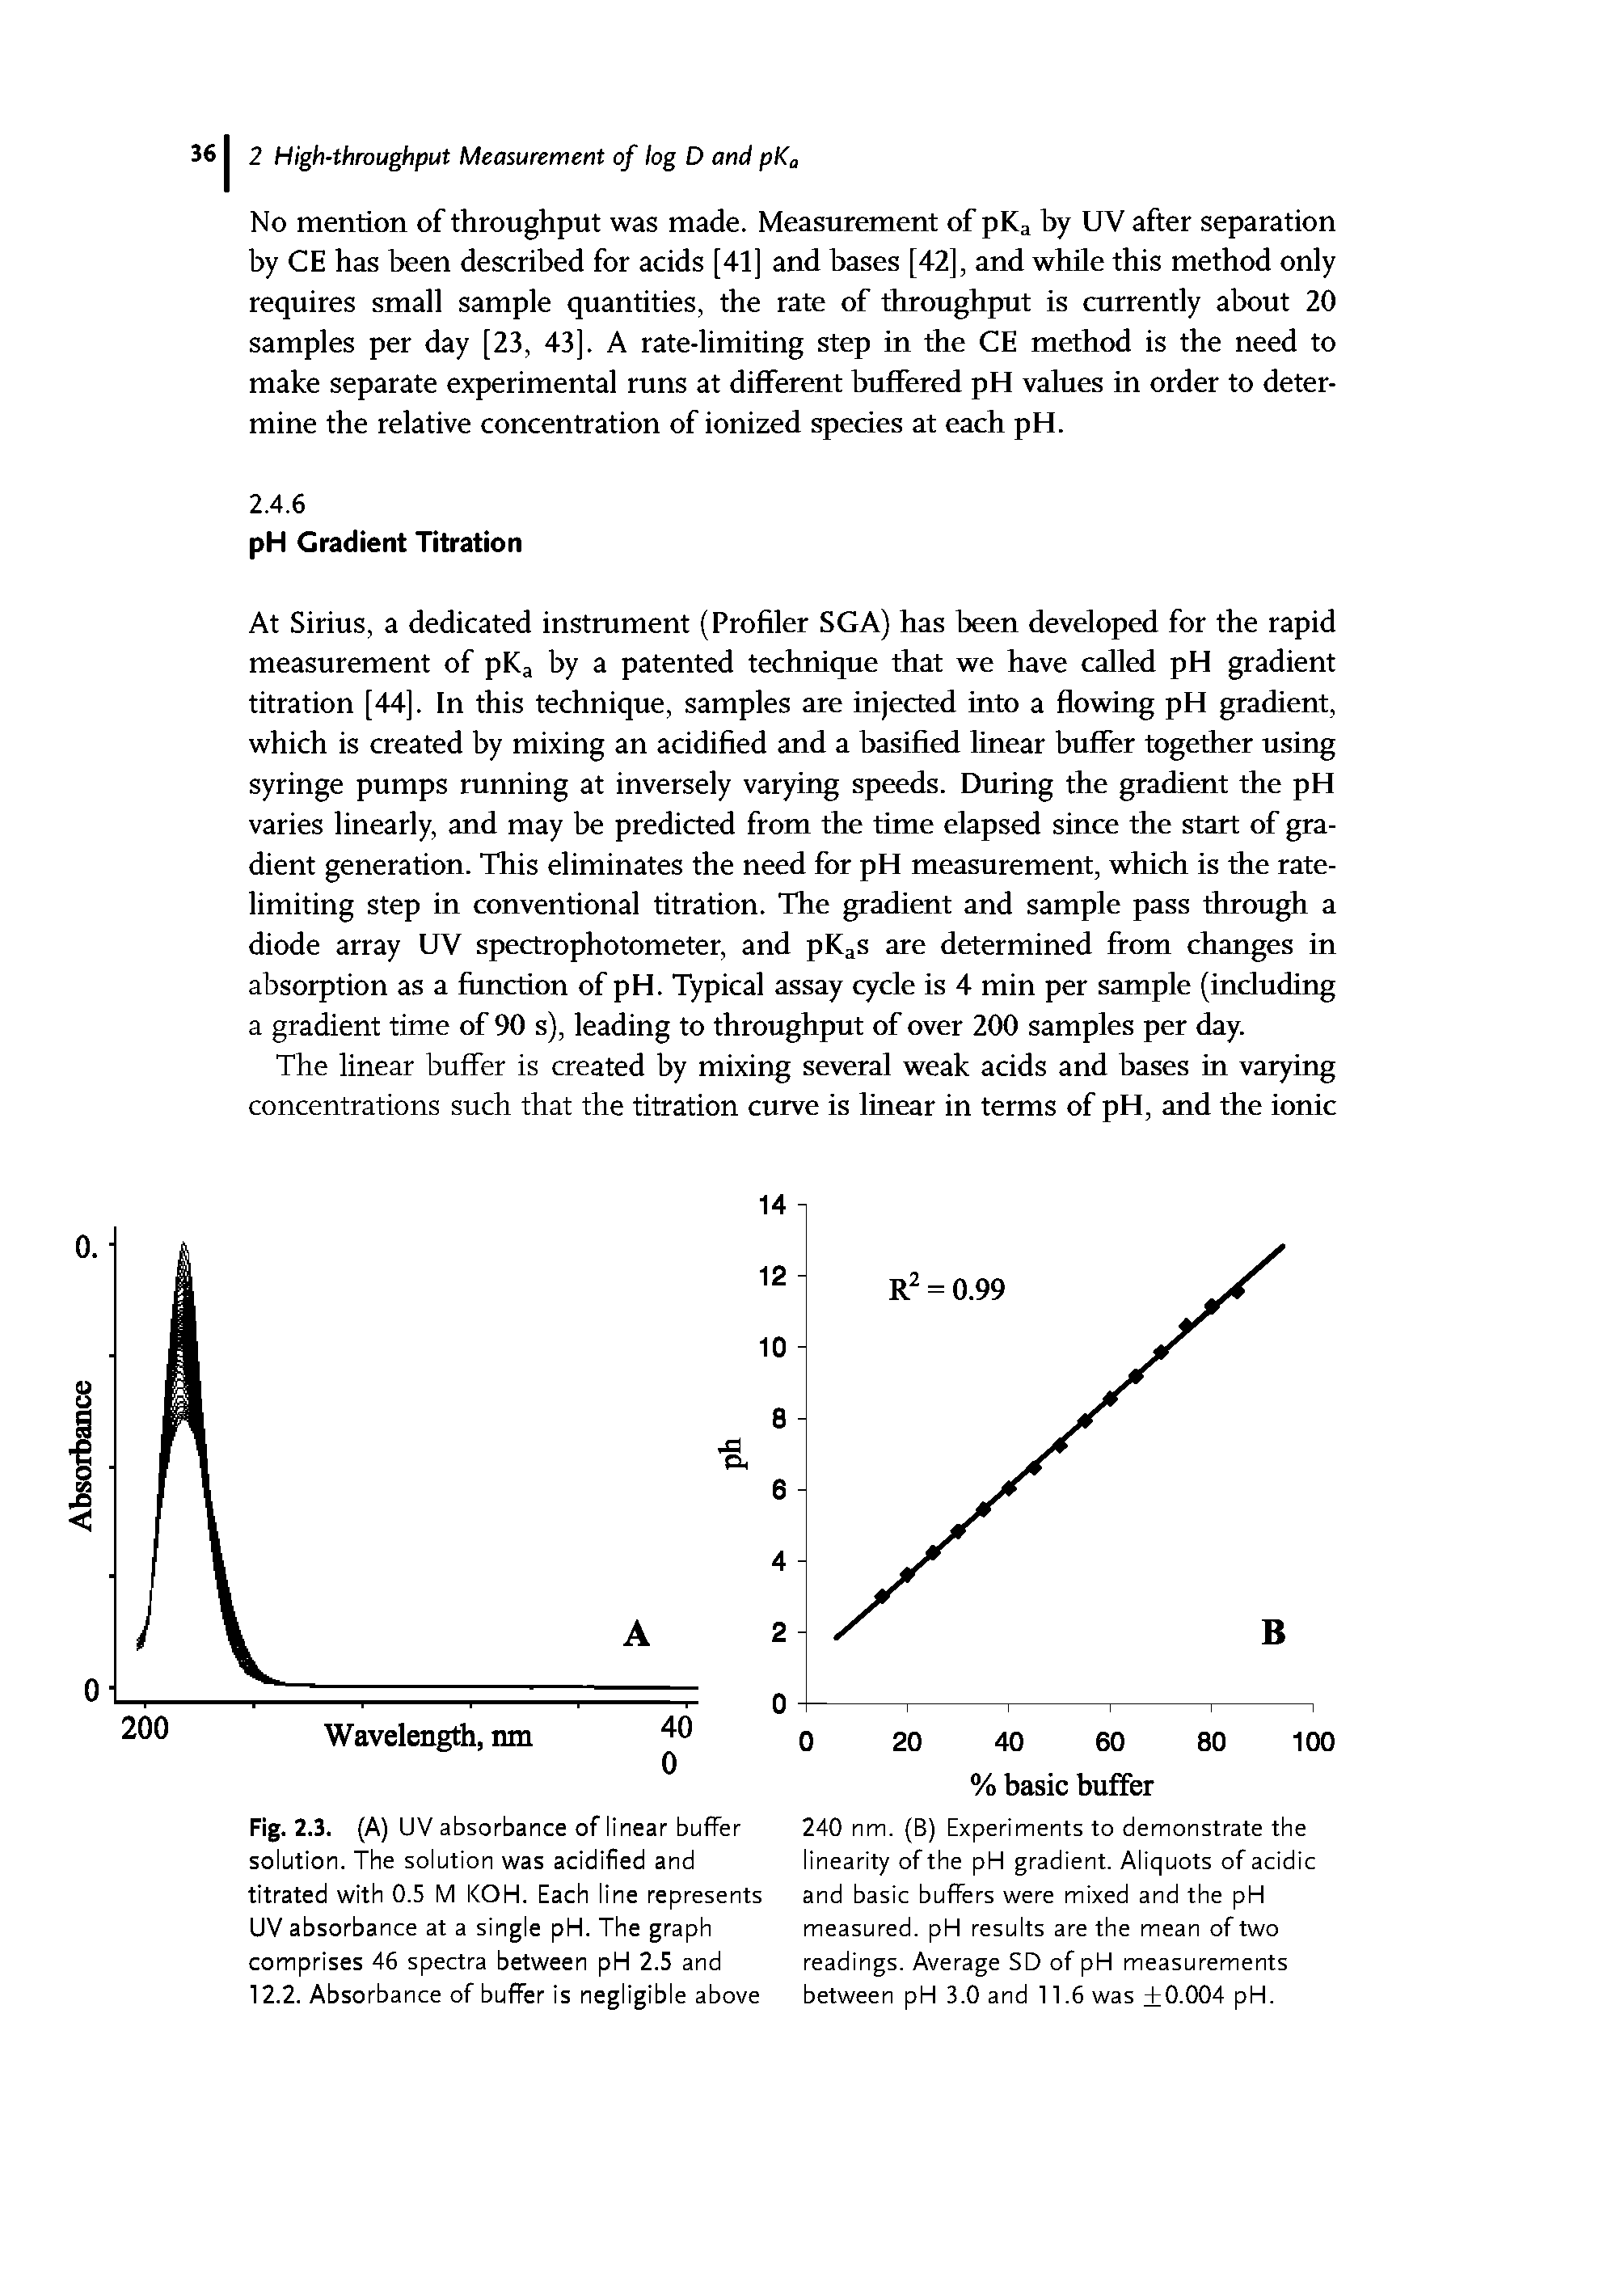 Fig. 2.3. (A) UV absorbance of linear buffer solution. The solution was acidified and titrated with 0.5 M KOH. Each line represents UV absorbance at a single pH. The graph comprises 46 spectra between pH 2.5 and 12.2. Absorbance of buffer is negligible above...